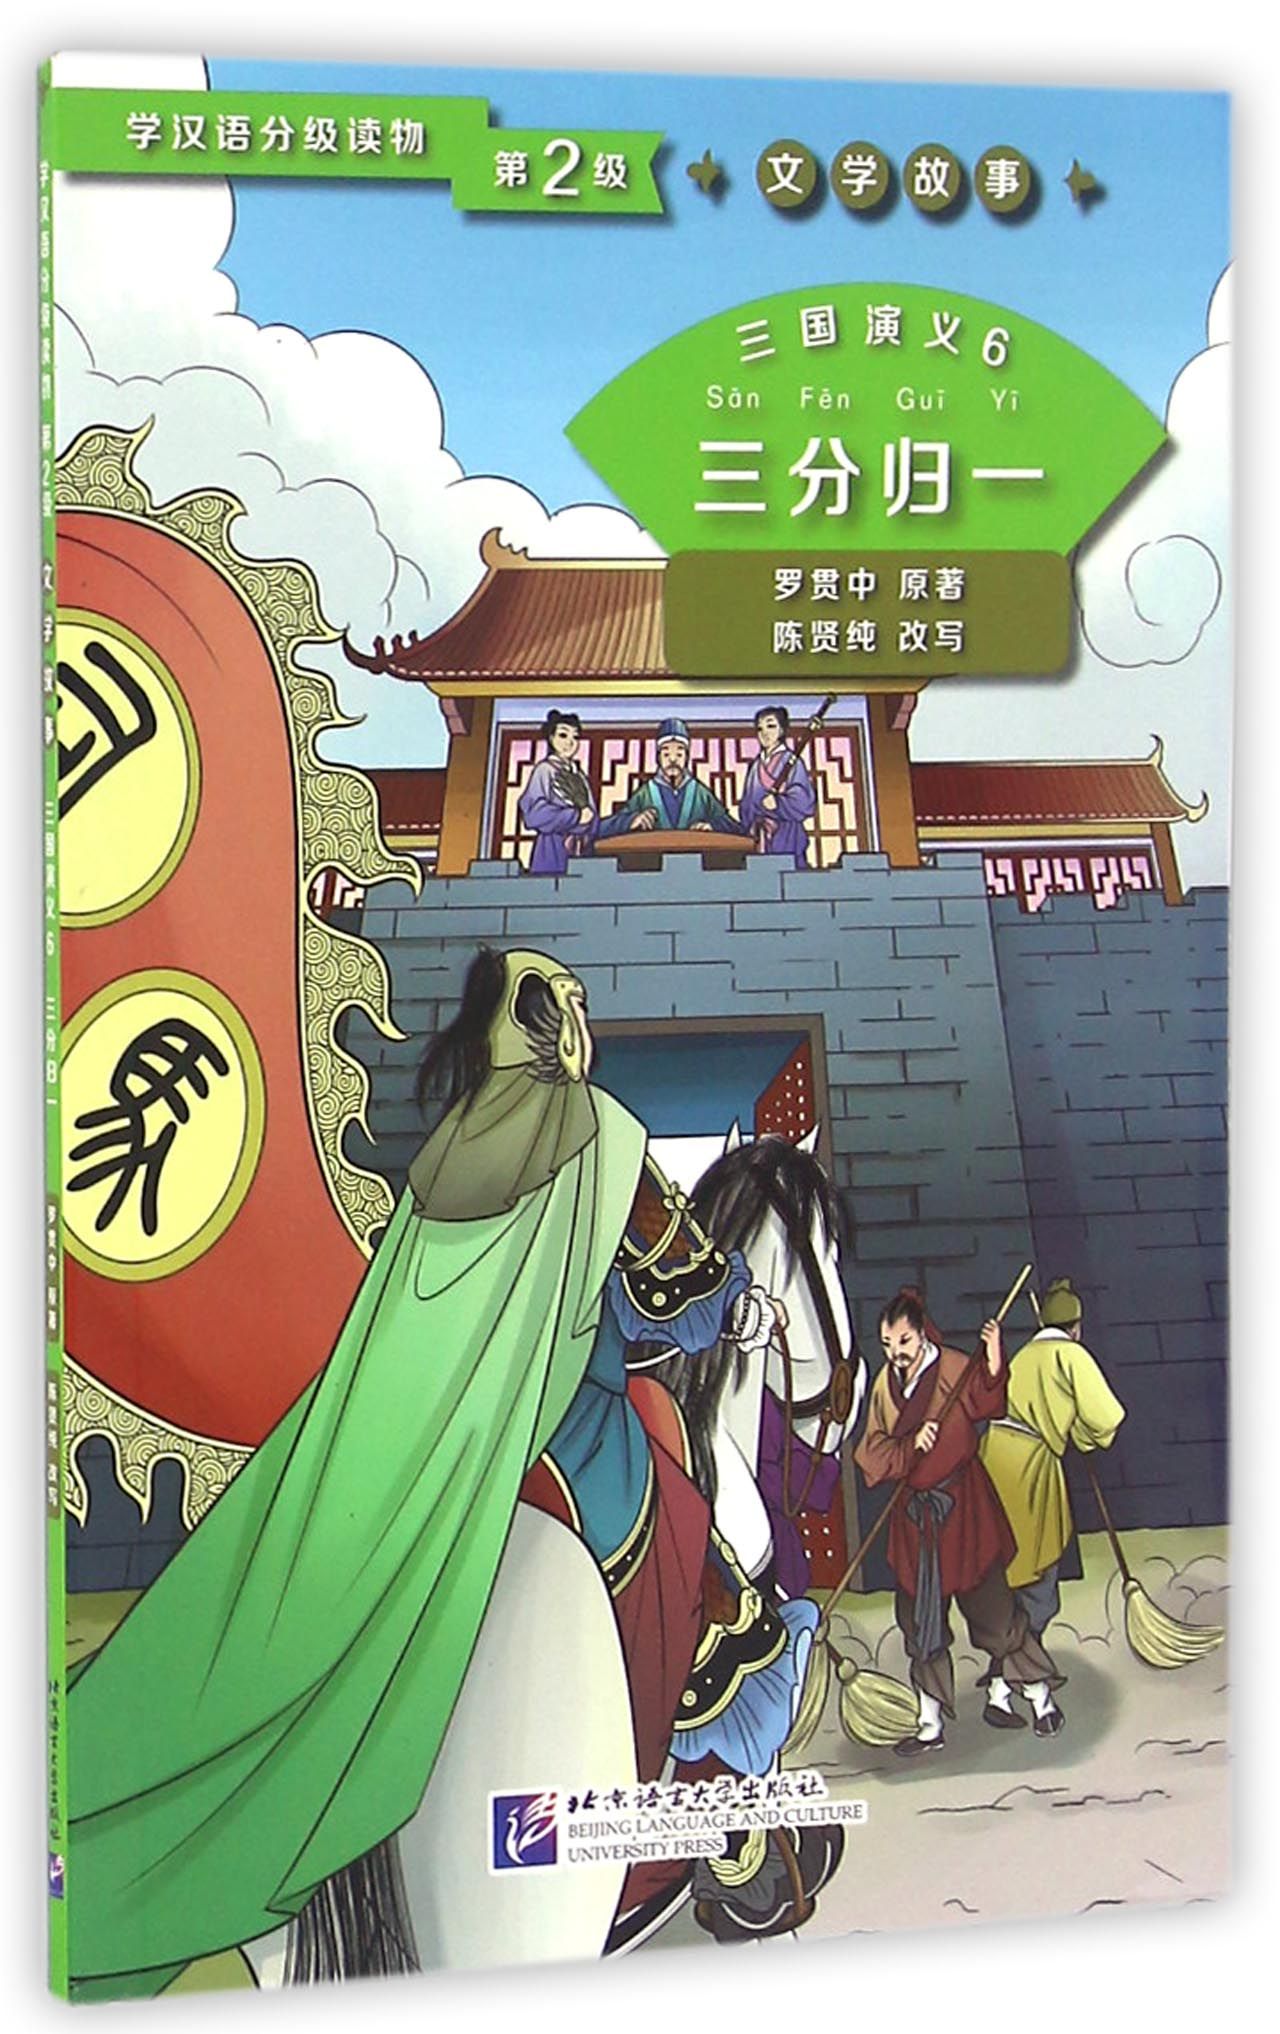 Graded Readers for Chinese Language Learners (Level 2) Literary Stories: San guo yanyi 6 - San Fen Gui Yi<br>ISBN: 978-7-5619-4436-3, 9787561944363